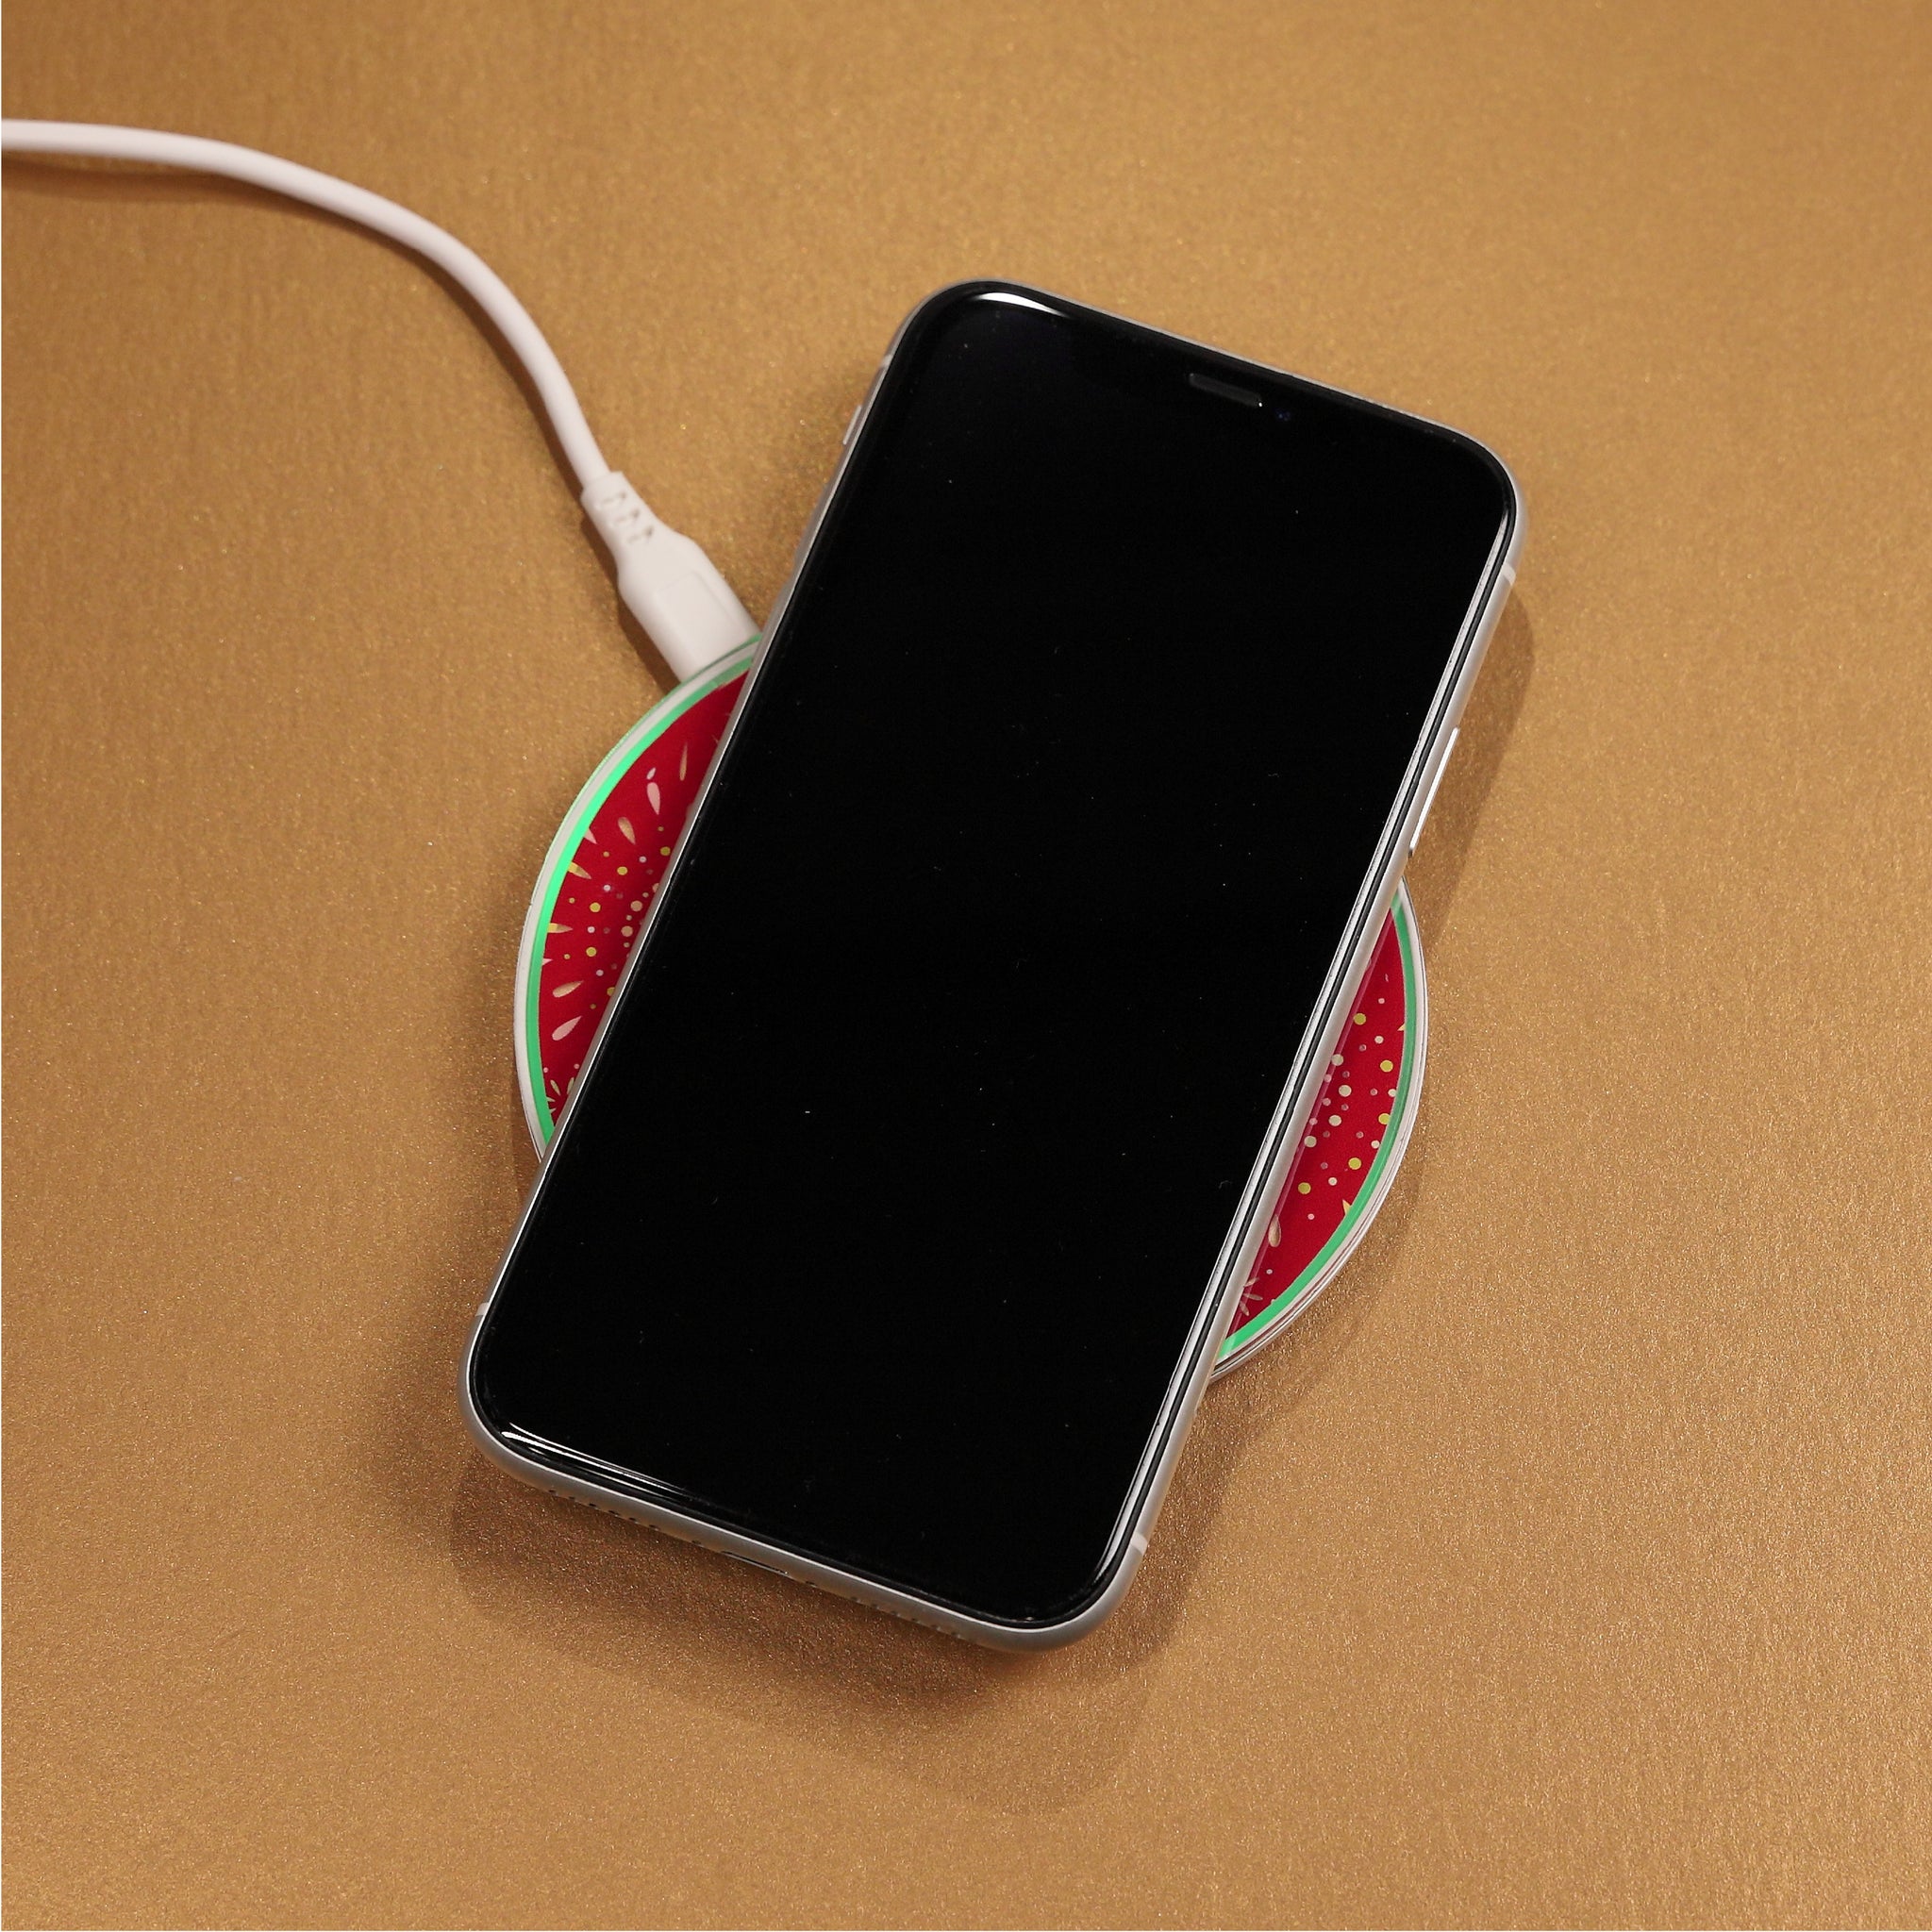 Double Happiness Wireless Charger By FingerART